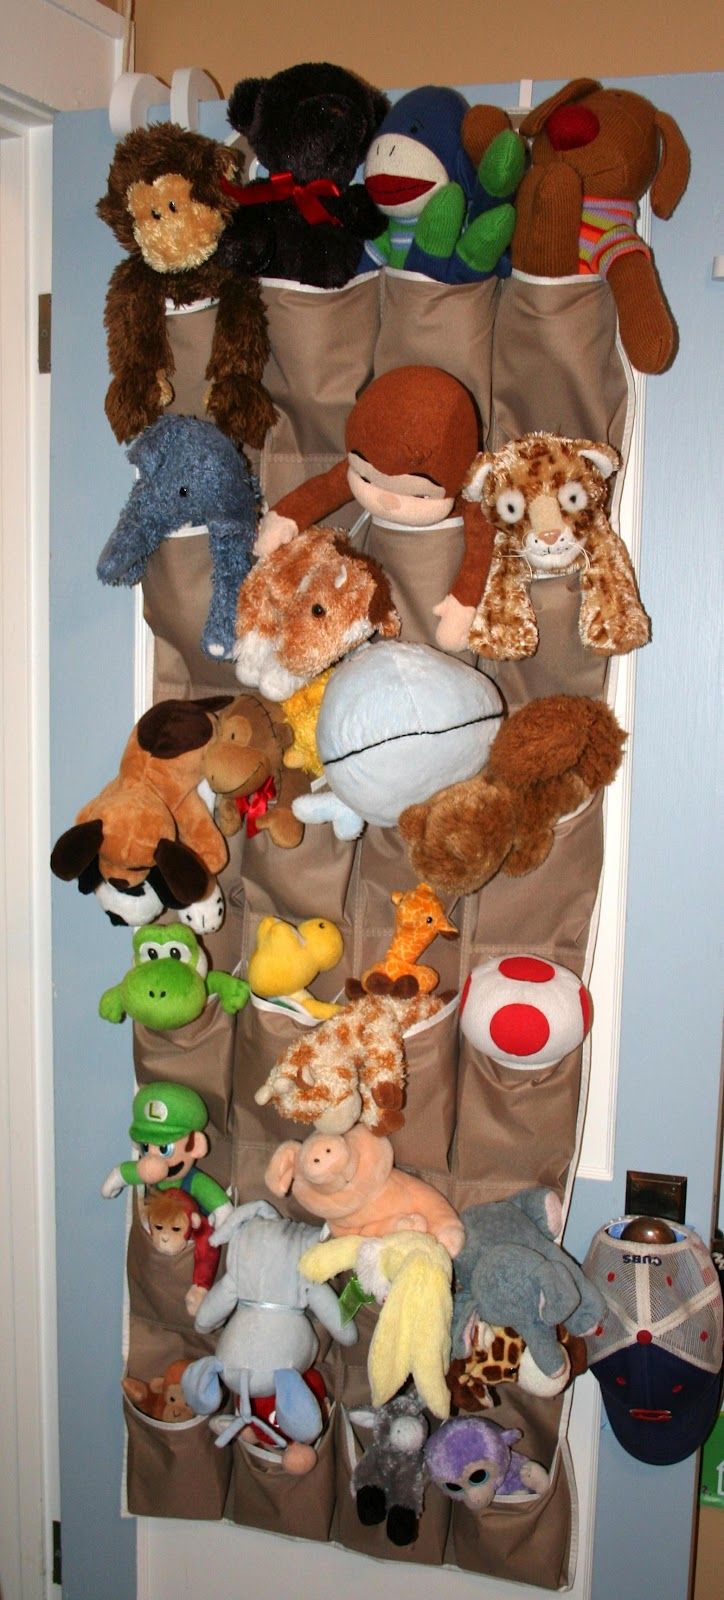 Shoe organizers have enough space for all your stuffed animals